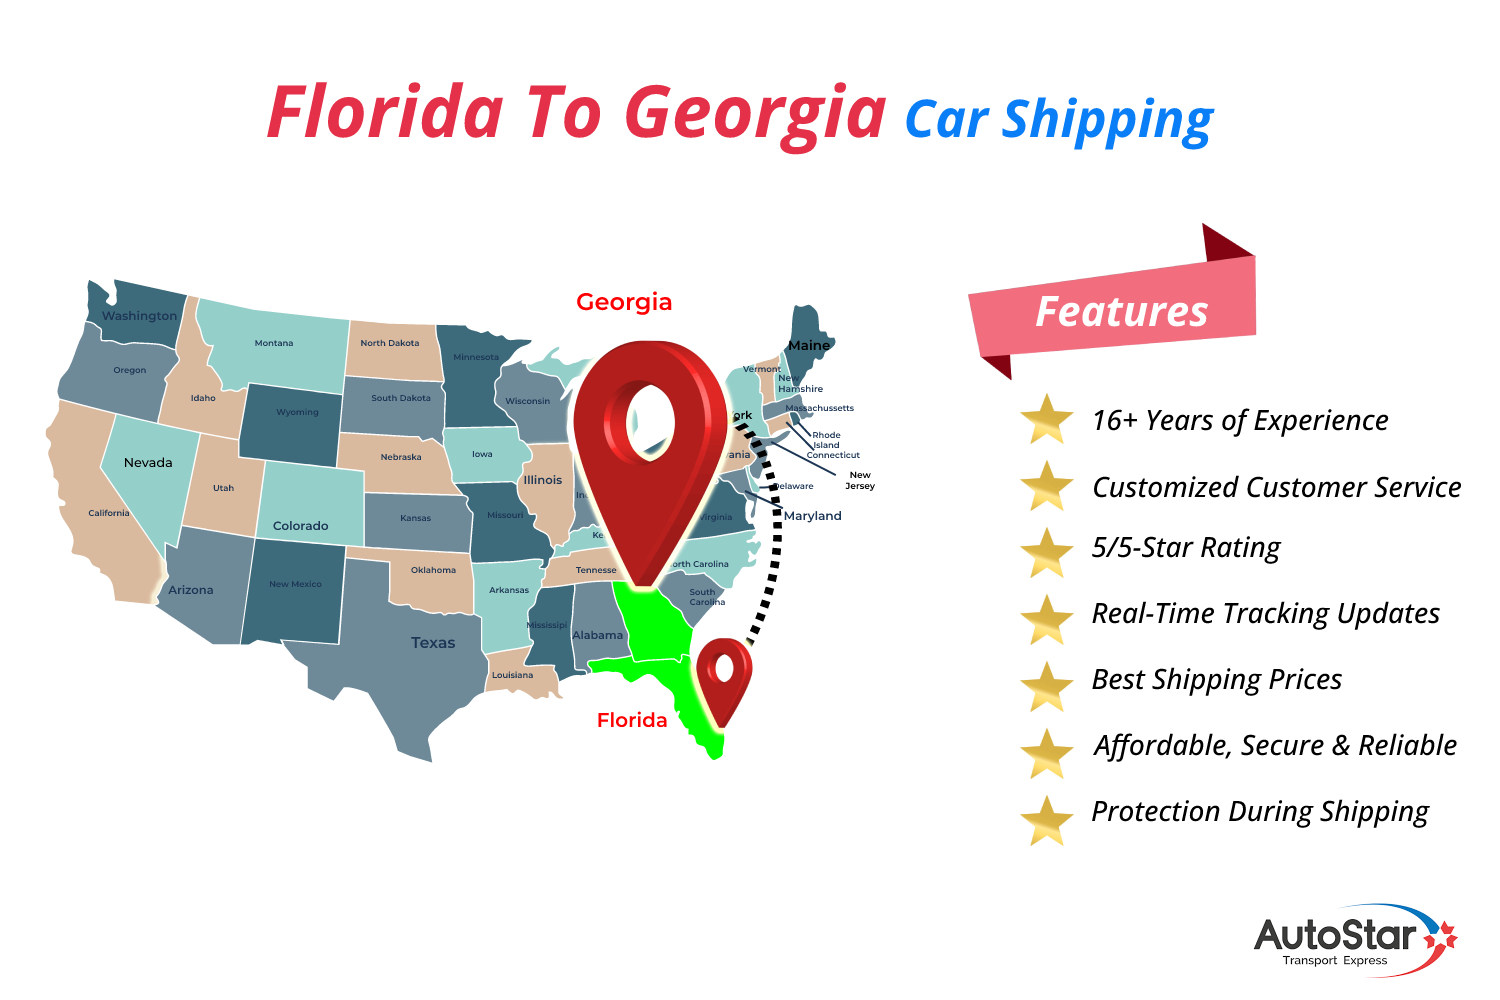 Benefits of Ship car from Florida to Georgia from AutoStar Transport